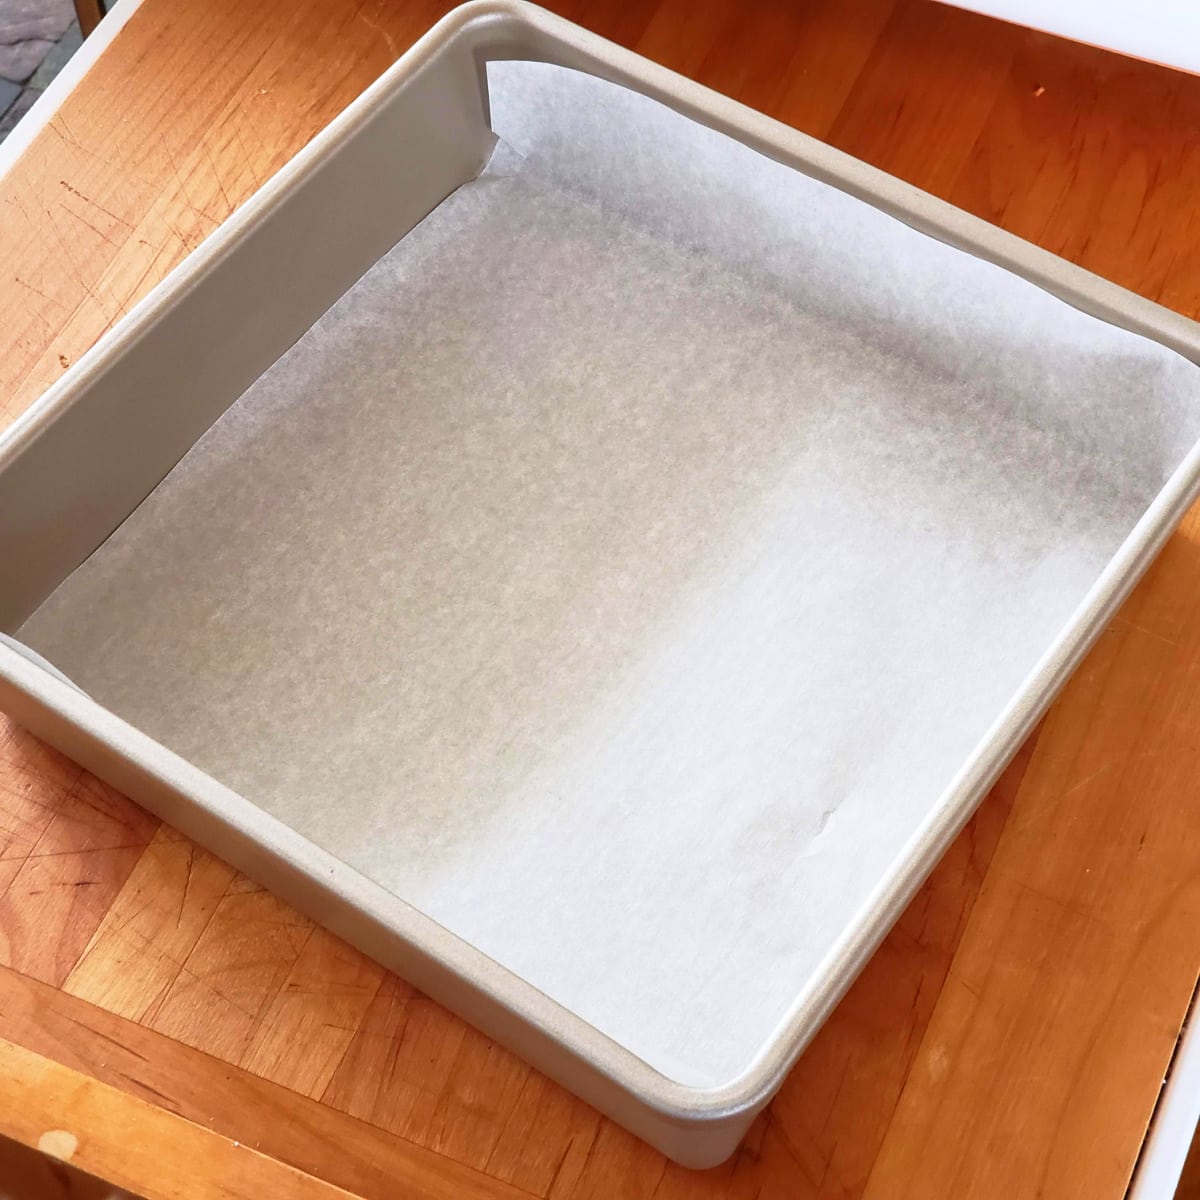 Line a 9-inch baking pan with parchment paper